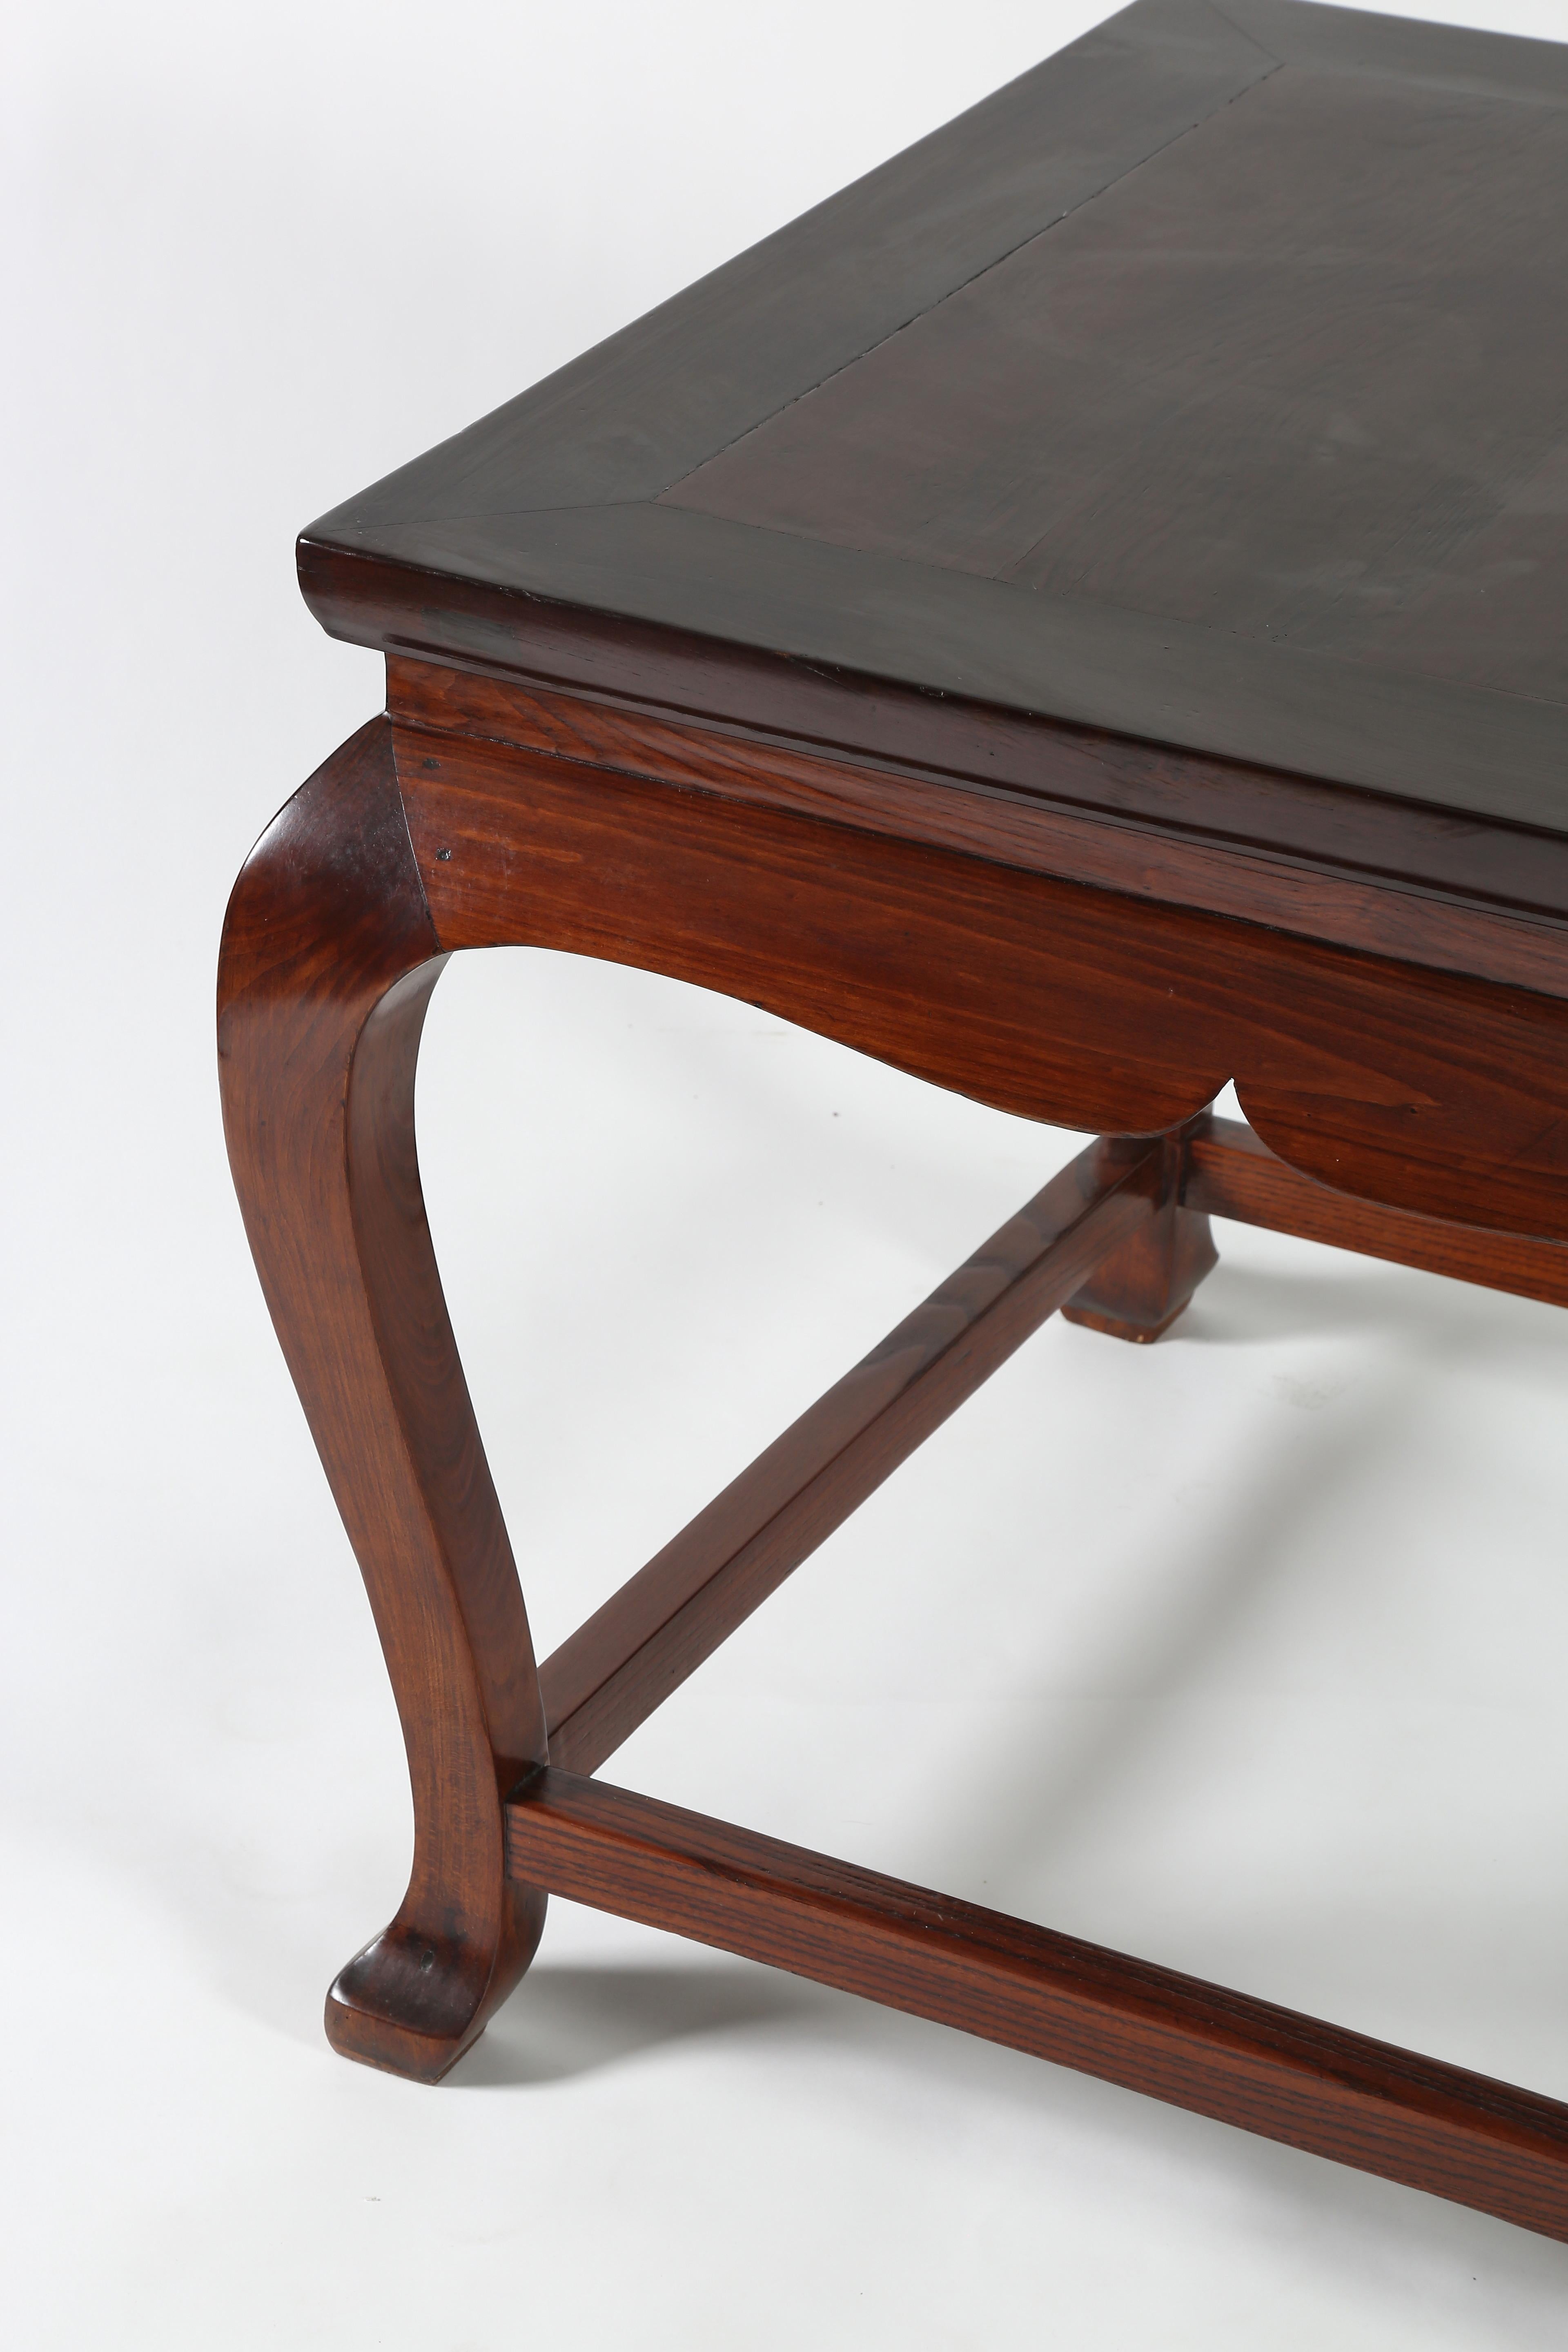 19th Century Square Table with Cabriole Legs For Sale 2